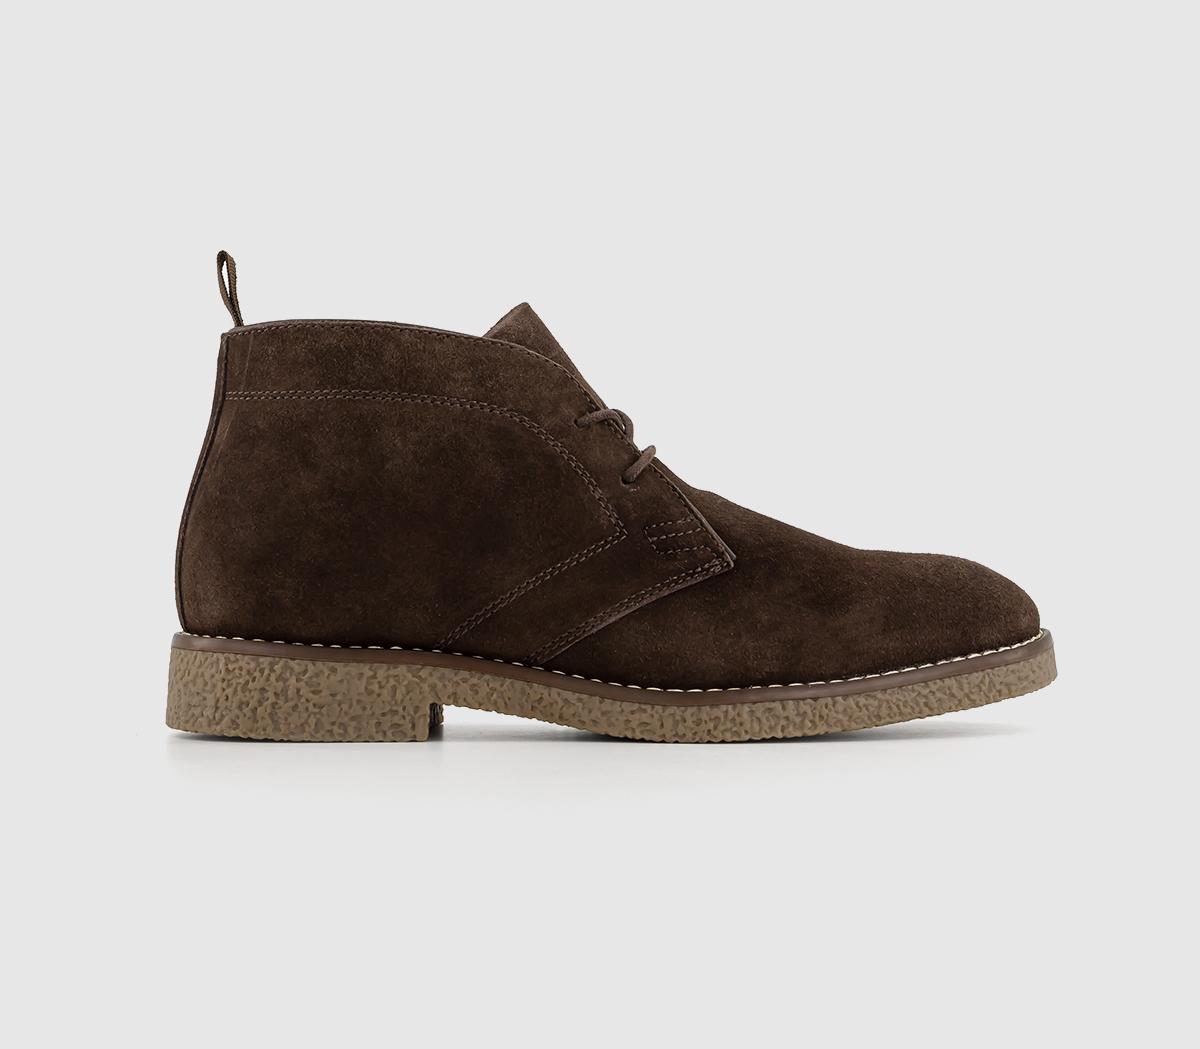 OFFICE Byron Crepe Look Chukka Boots Brown Suede - Men’s Boots